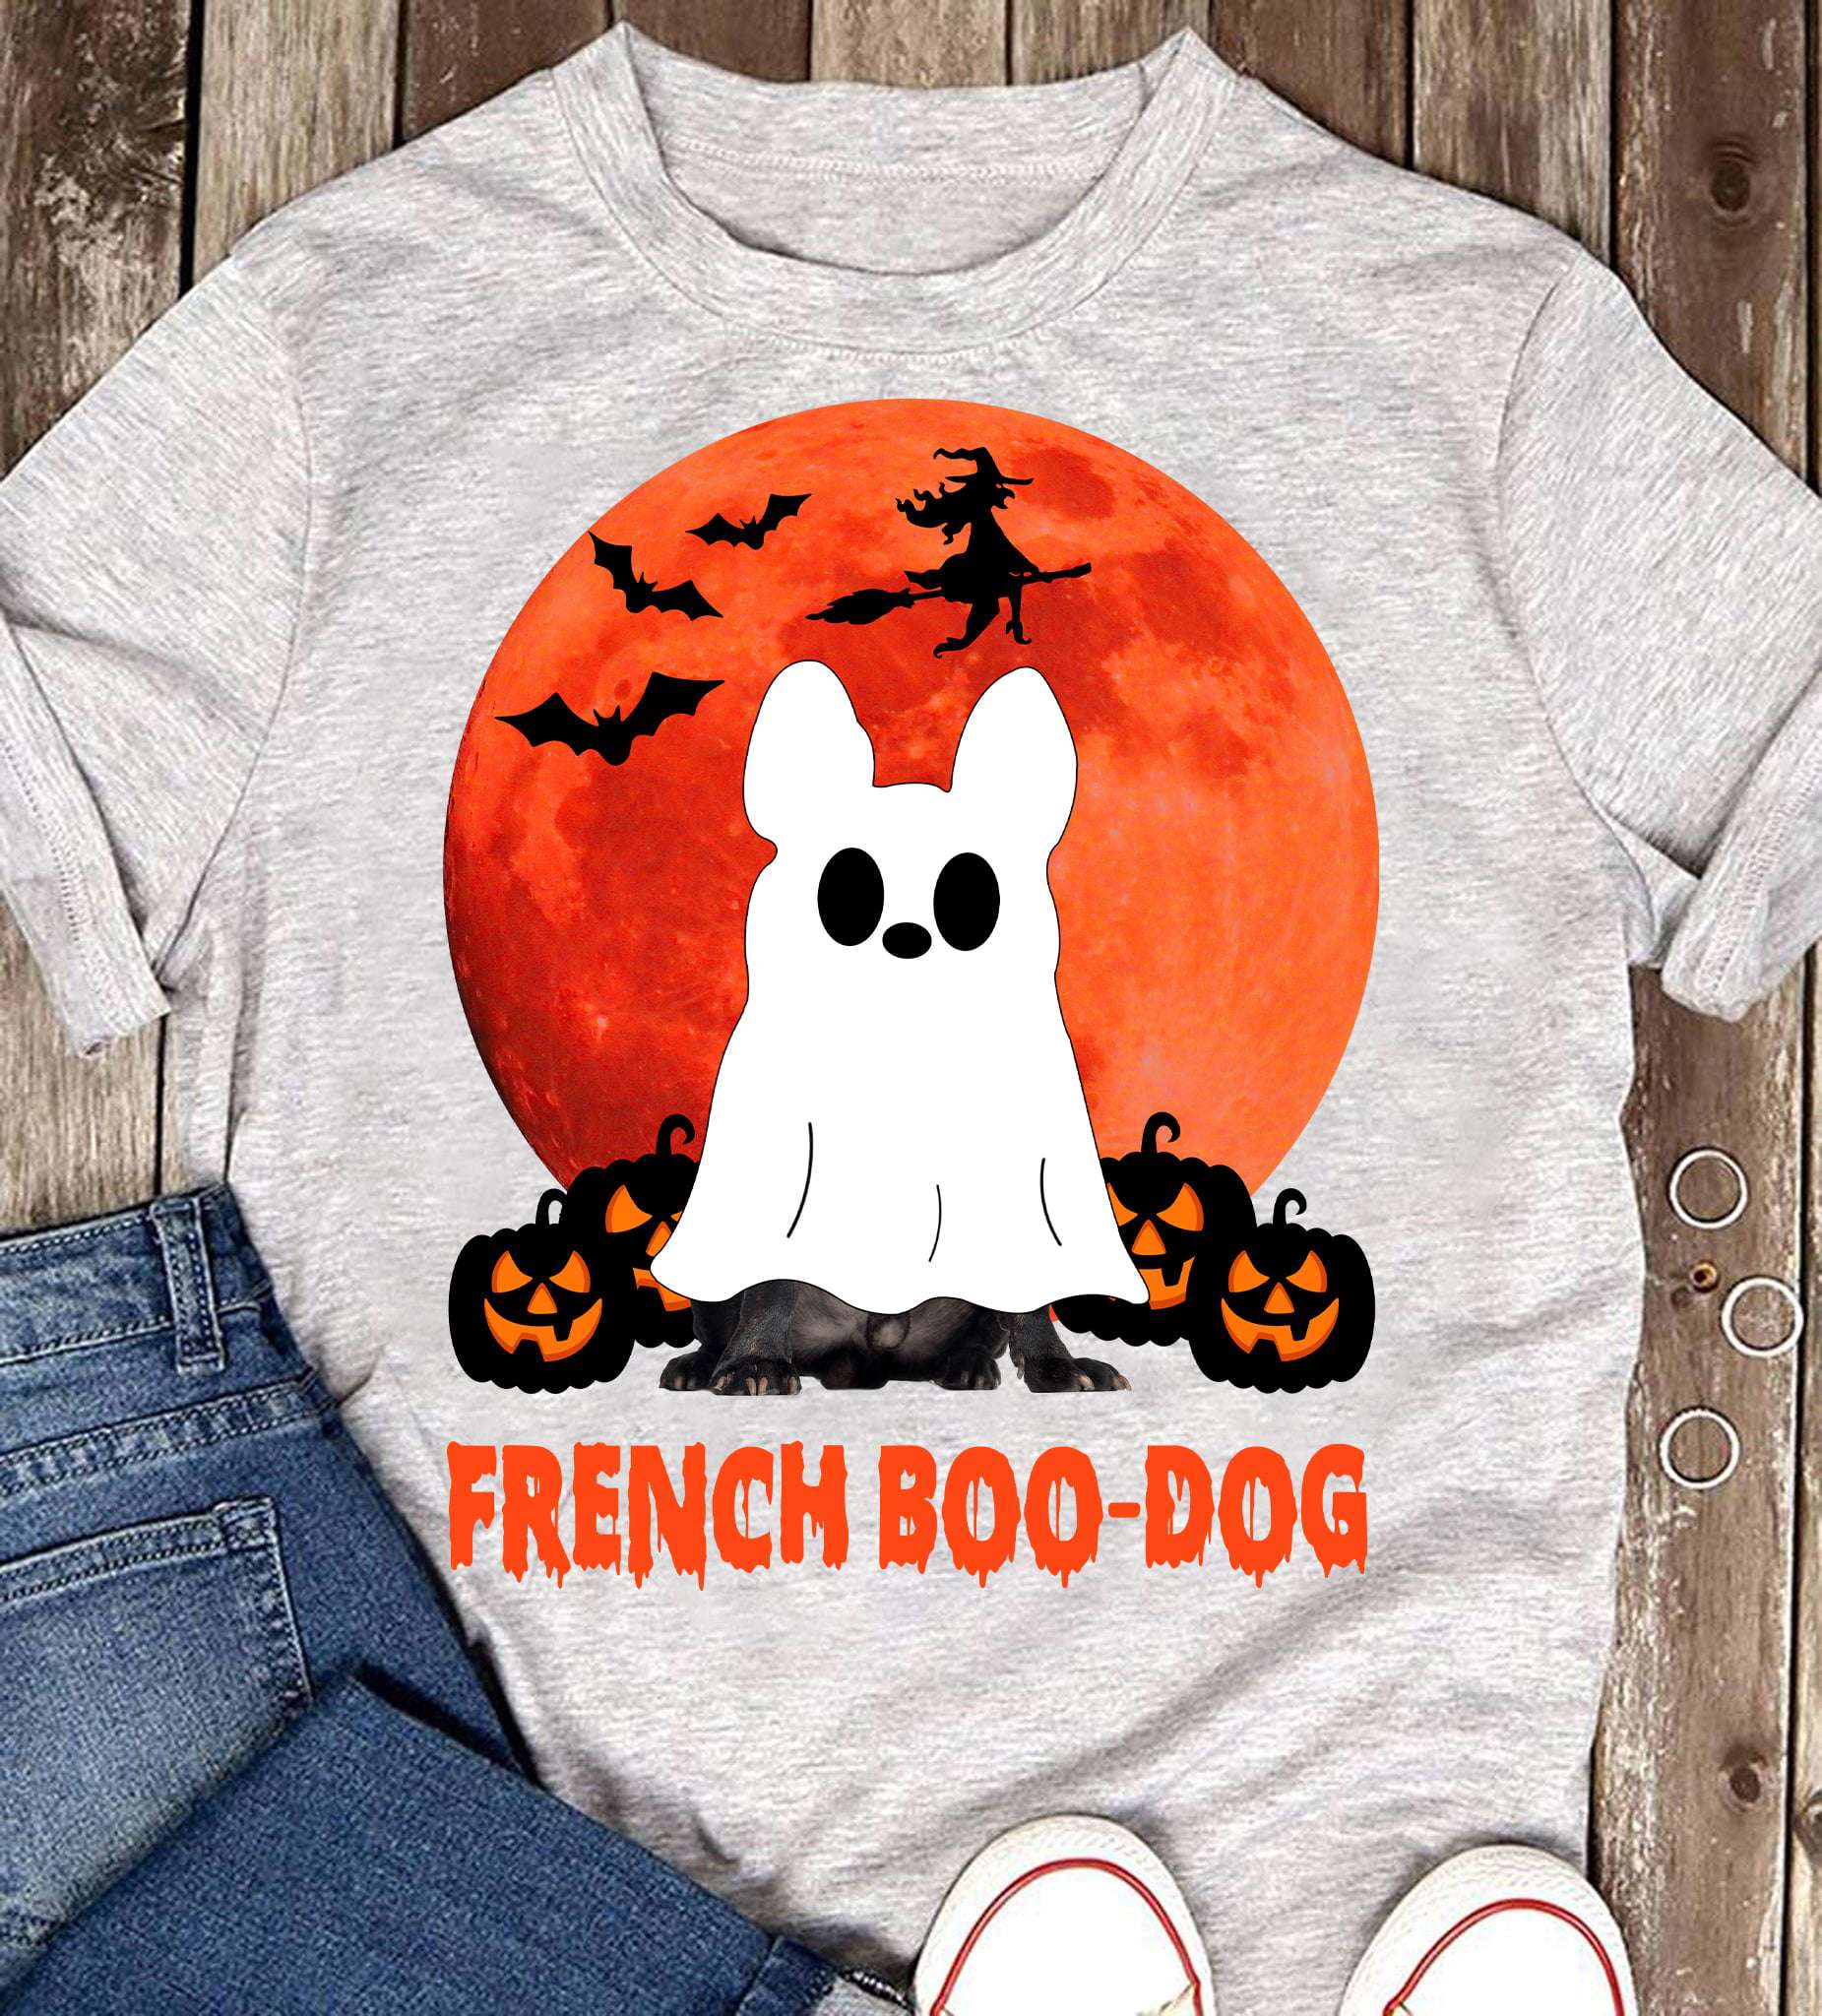 French boo-dog - Frenchie white ghost costume, Frenchie dog lover